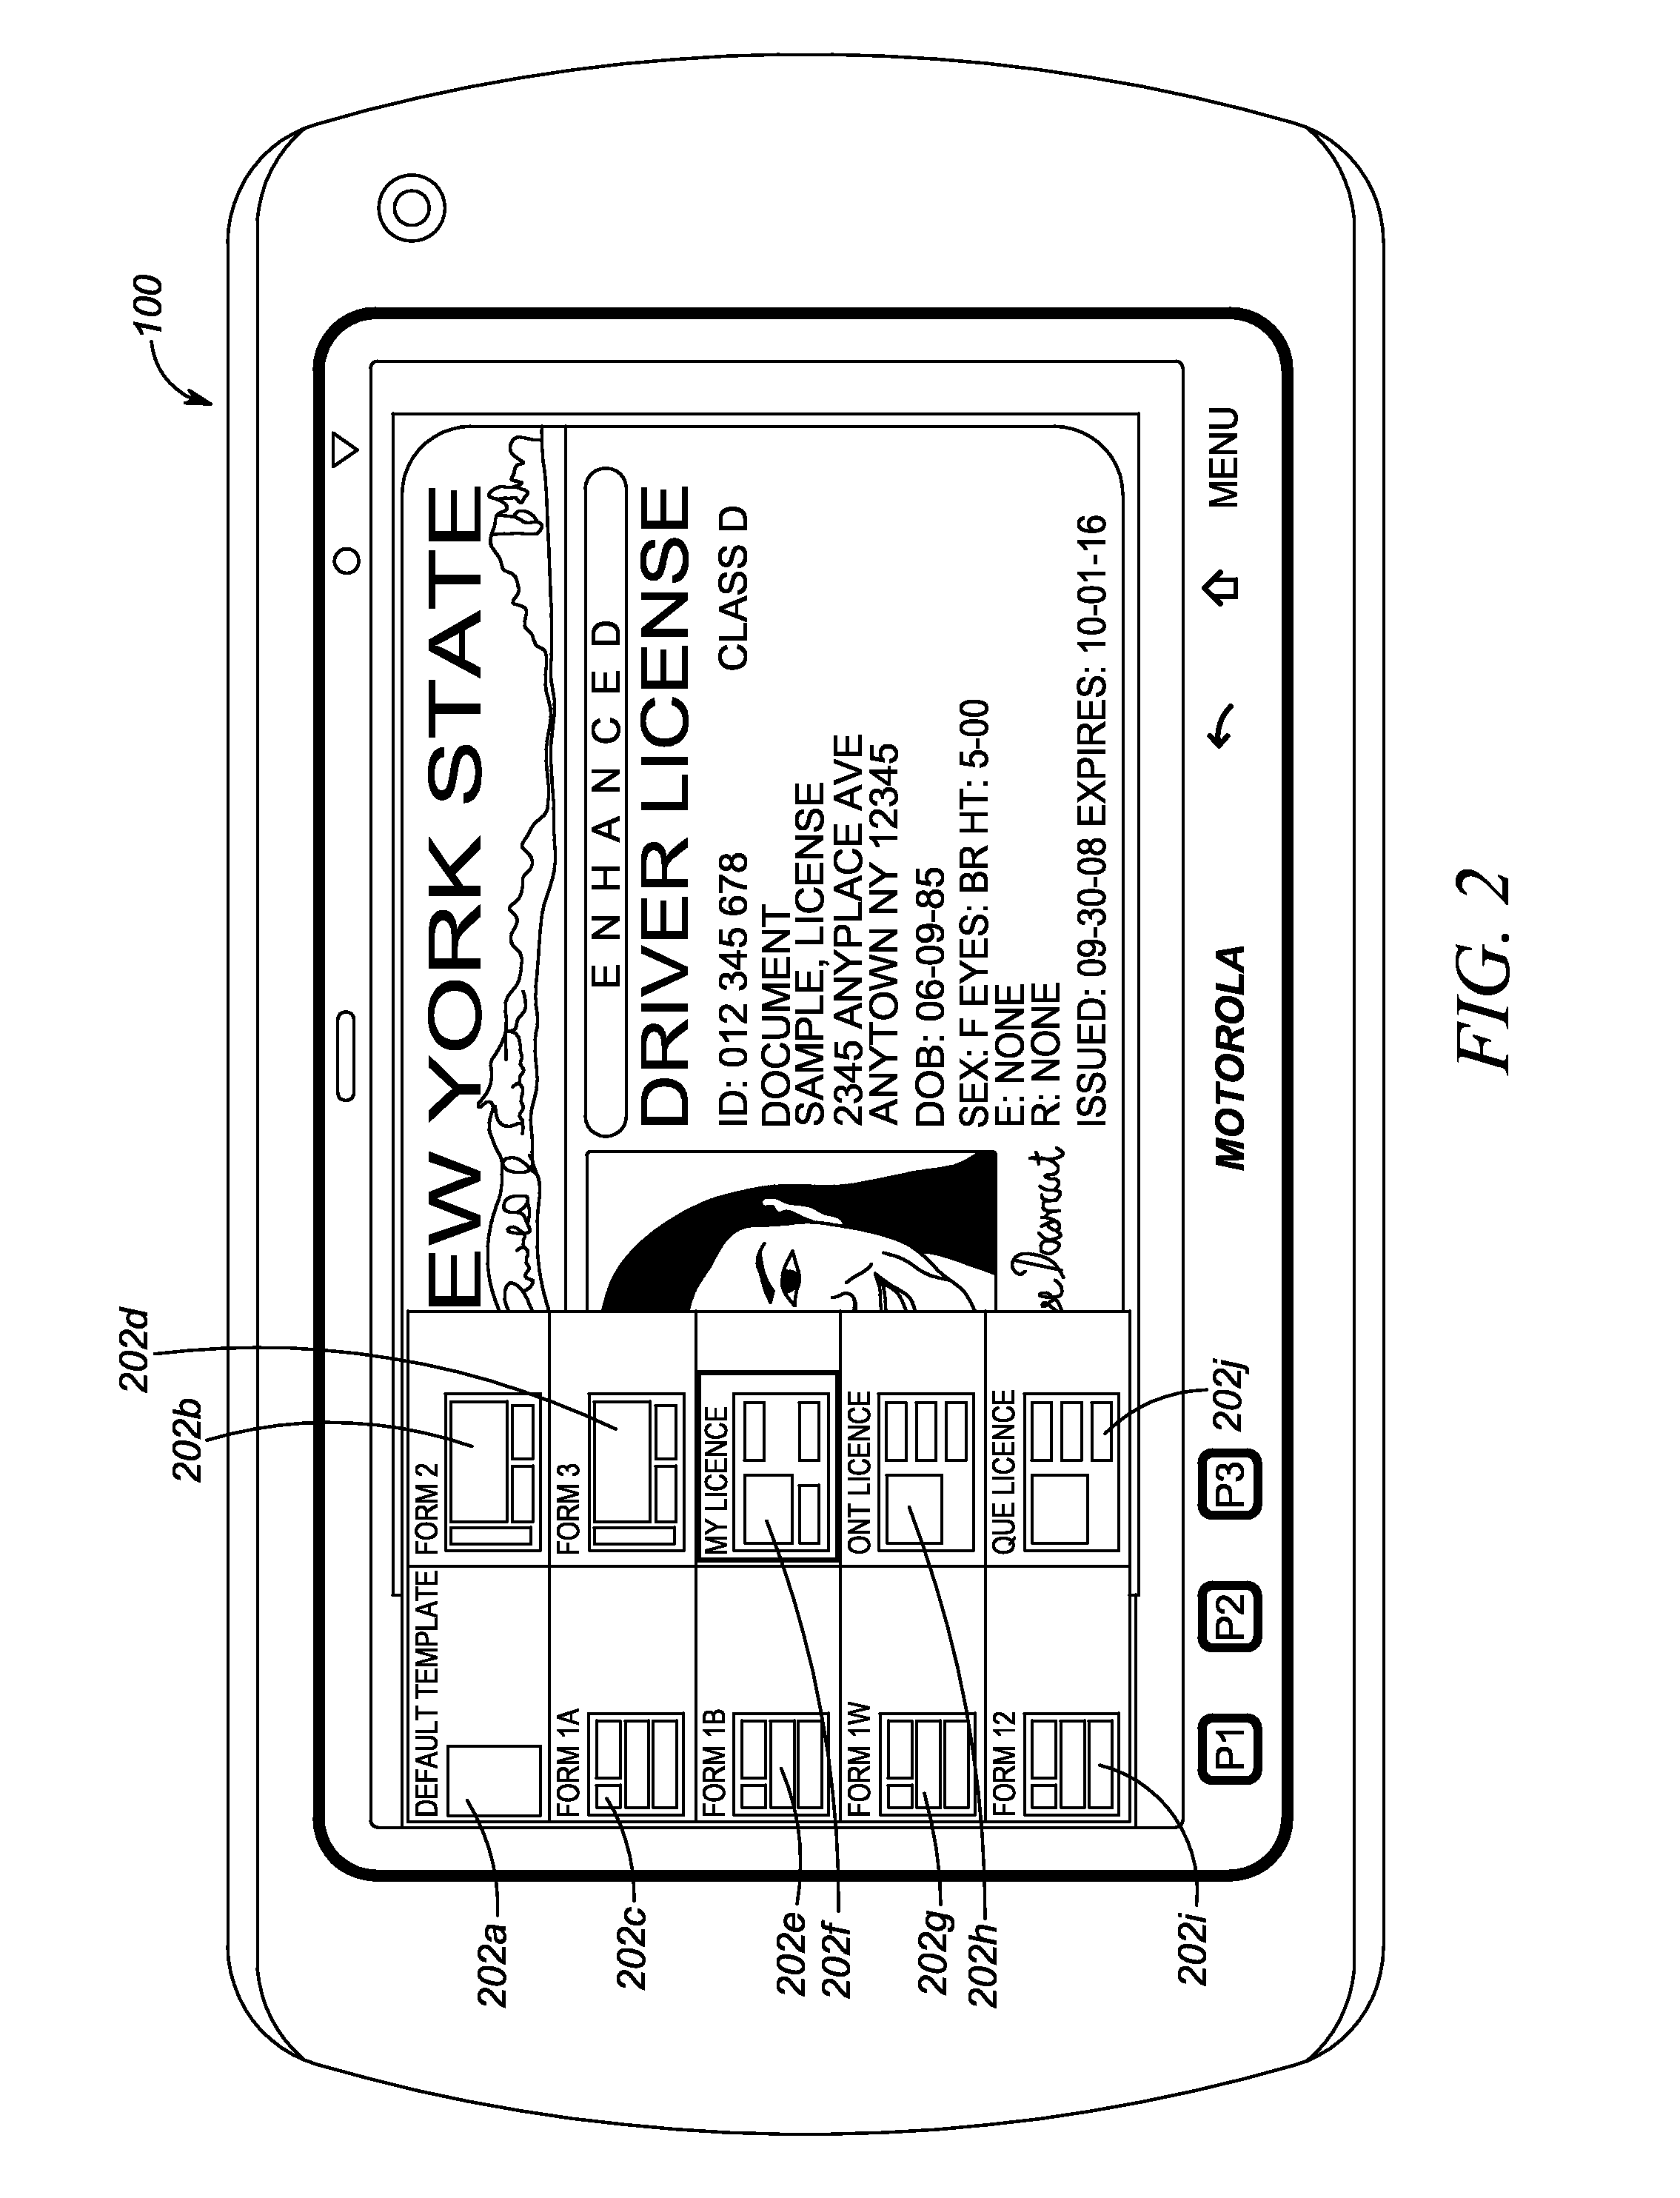 Method and apparatus for capturing and extracting content from documents on a mobile device